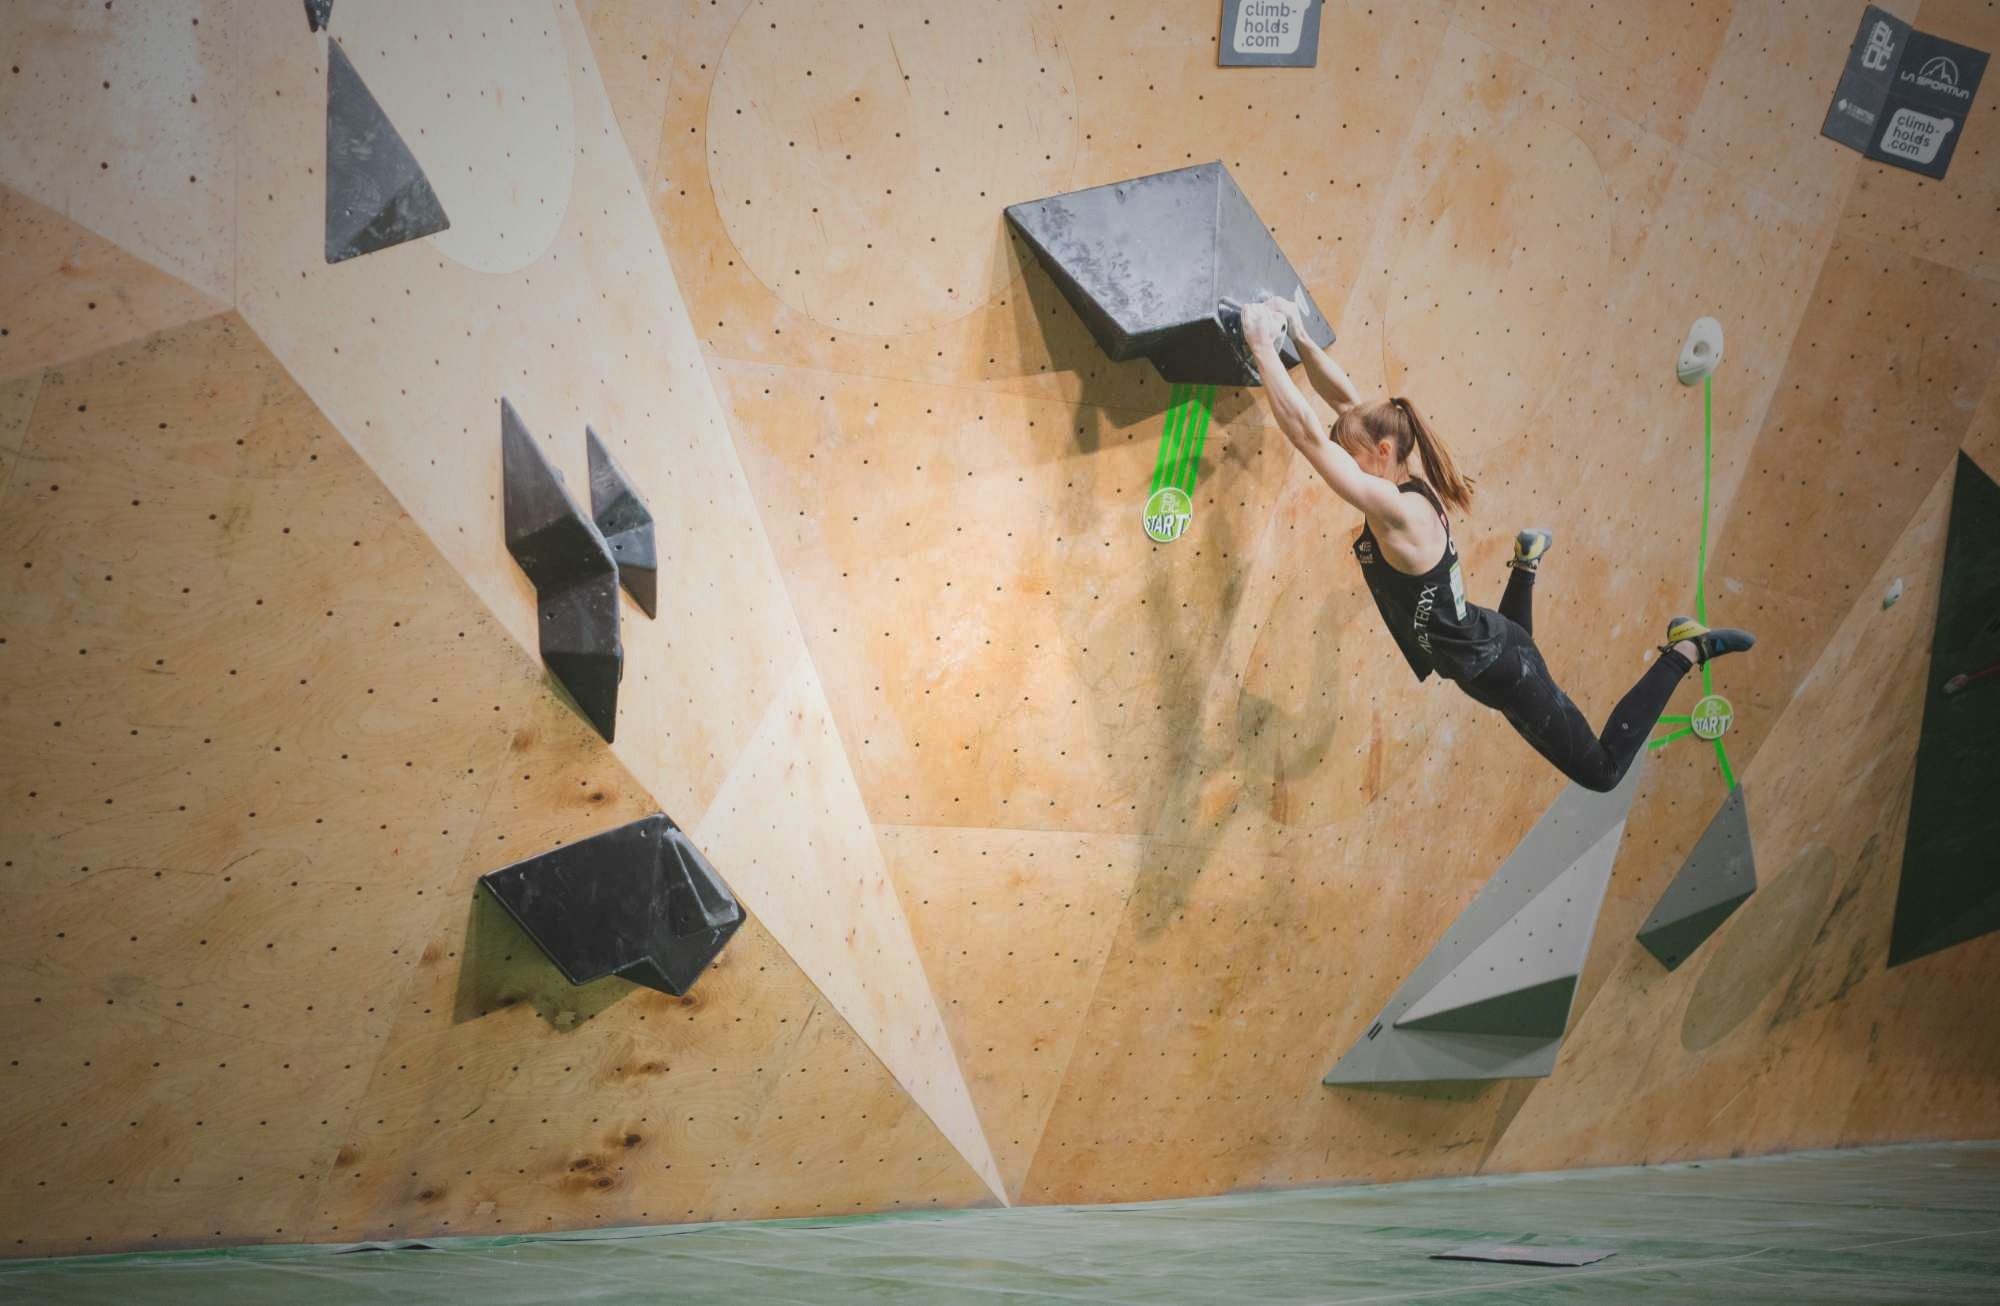 A climber swinging on a start hold in a competition